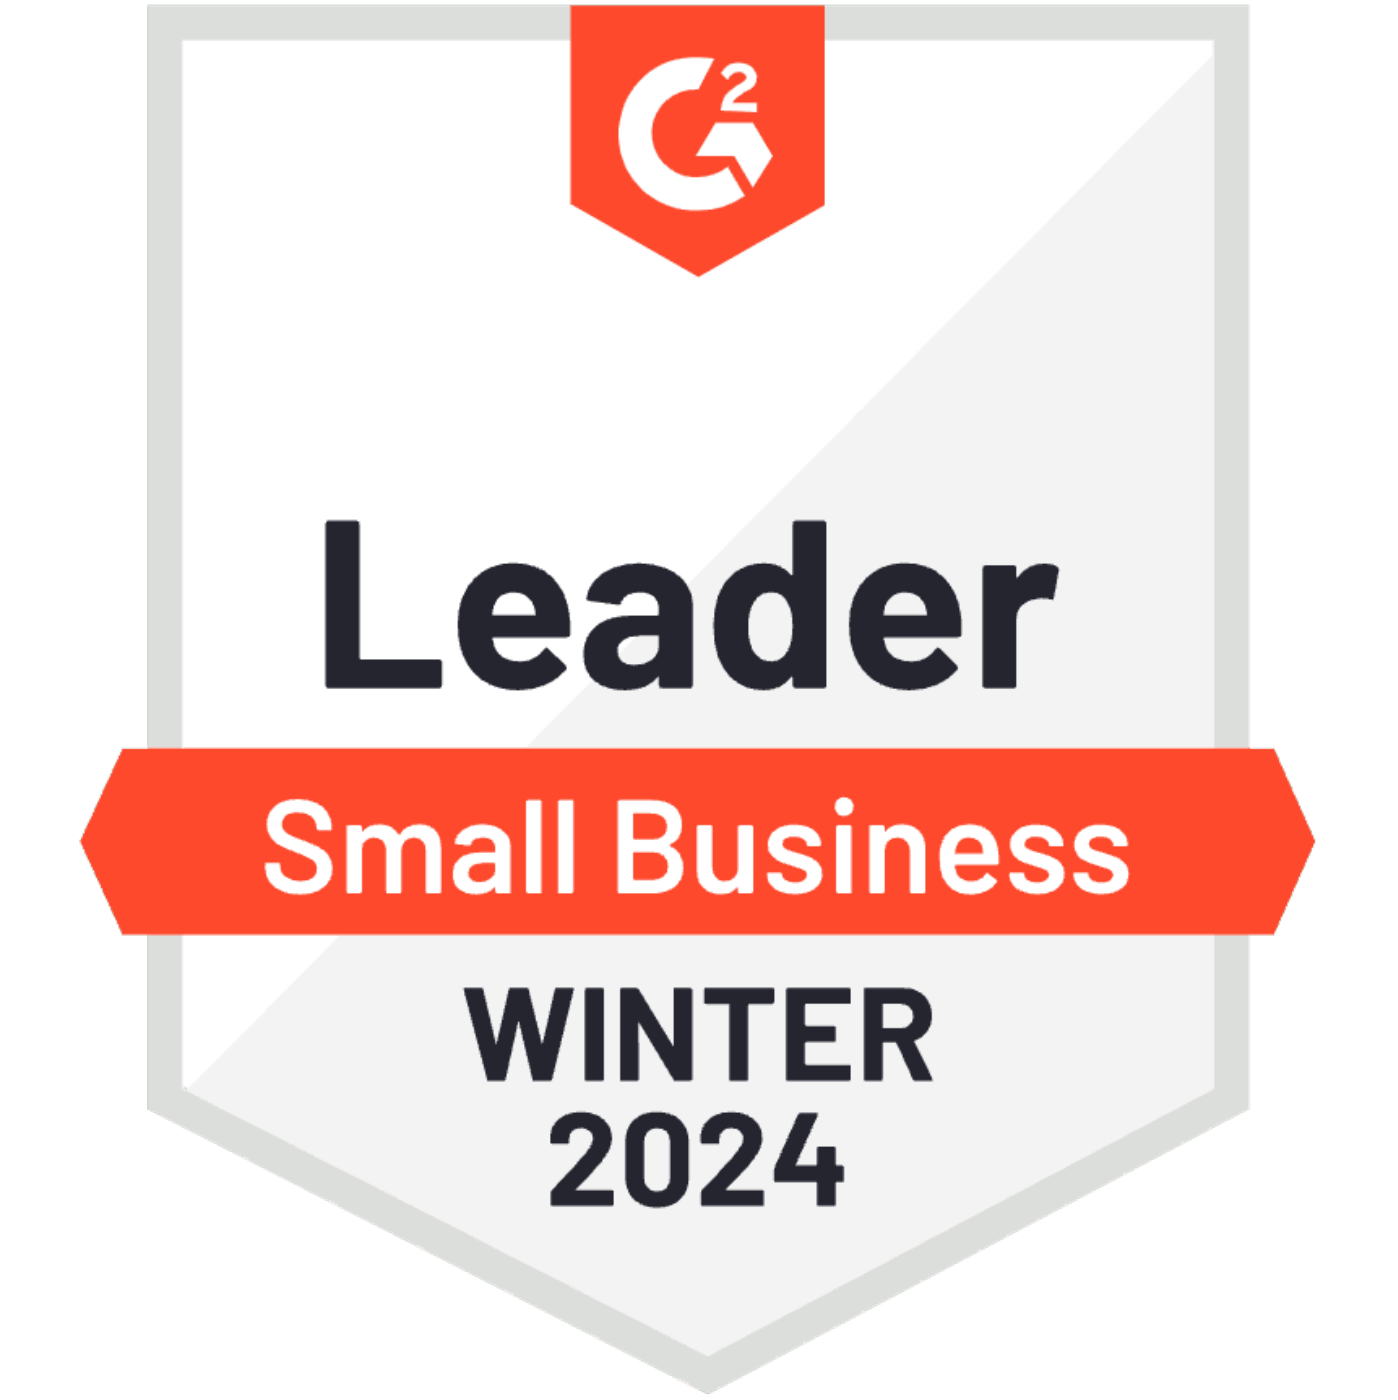 G2 Badge: Leader Small Business Winter 2024